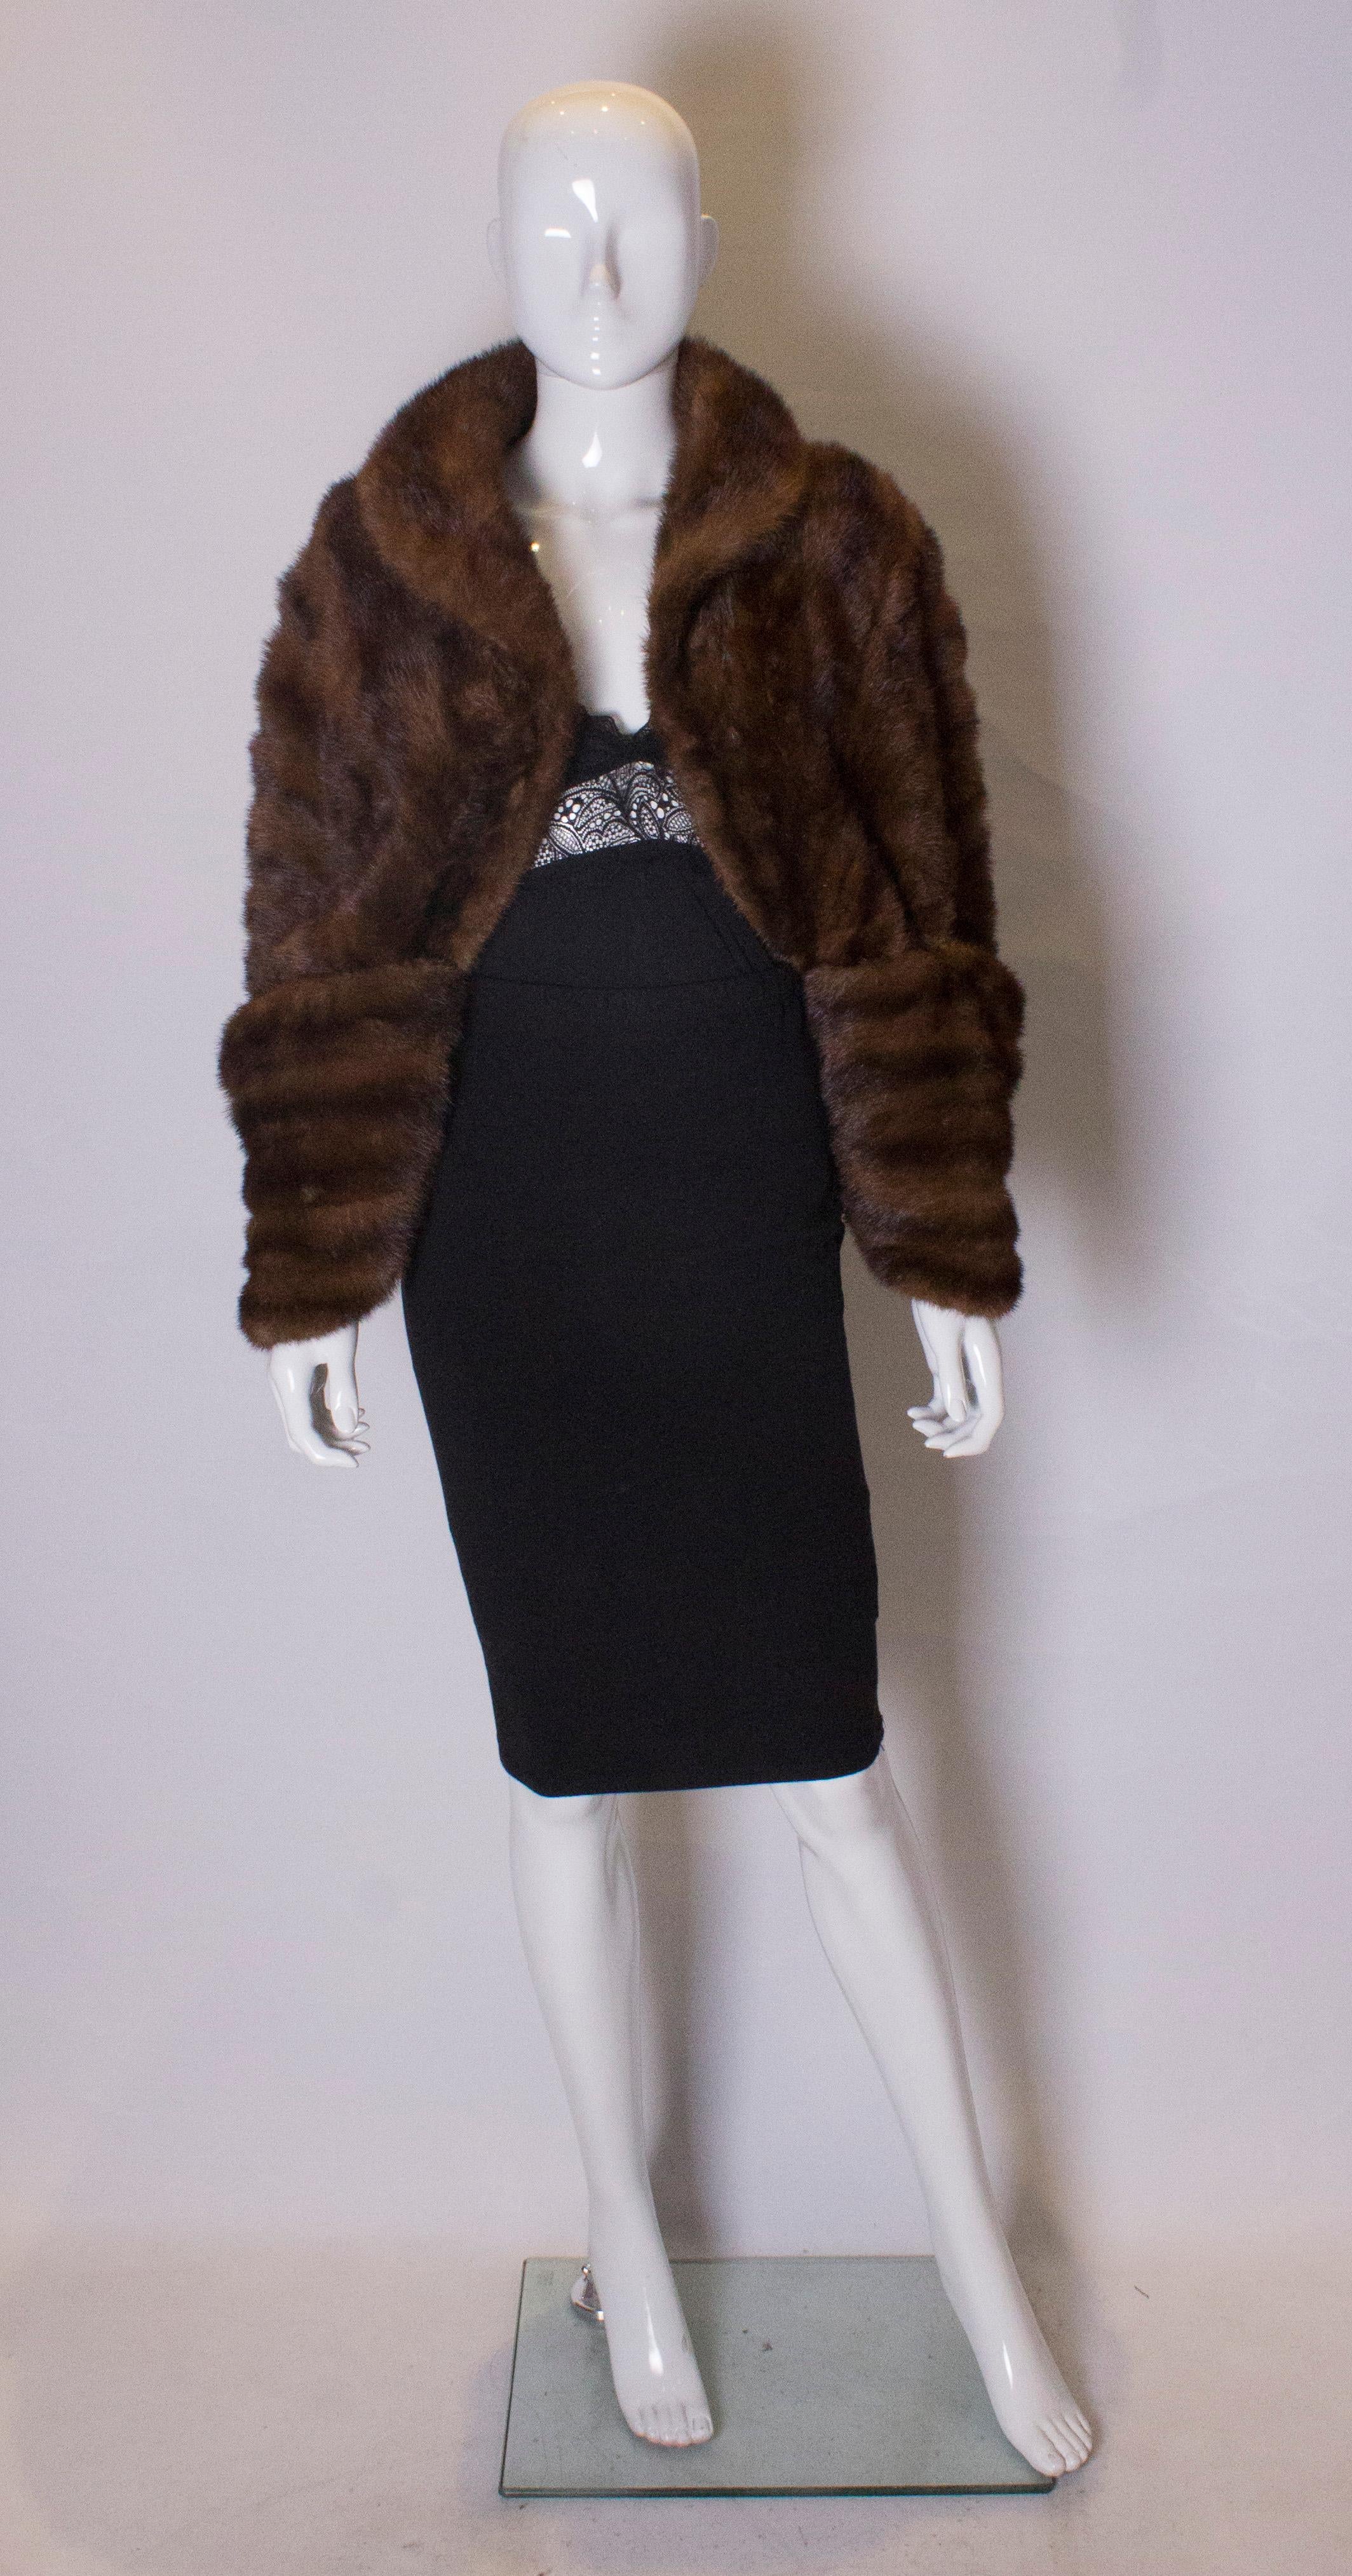 A chic vintage mink shrug with attractive detail on cuffs.  The shrug has a hook fastening, and is fully lined. Measurements. Shoulder to shoulder 24'', length 17''.